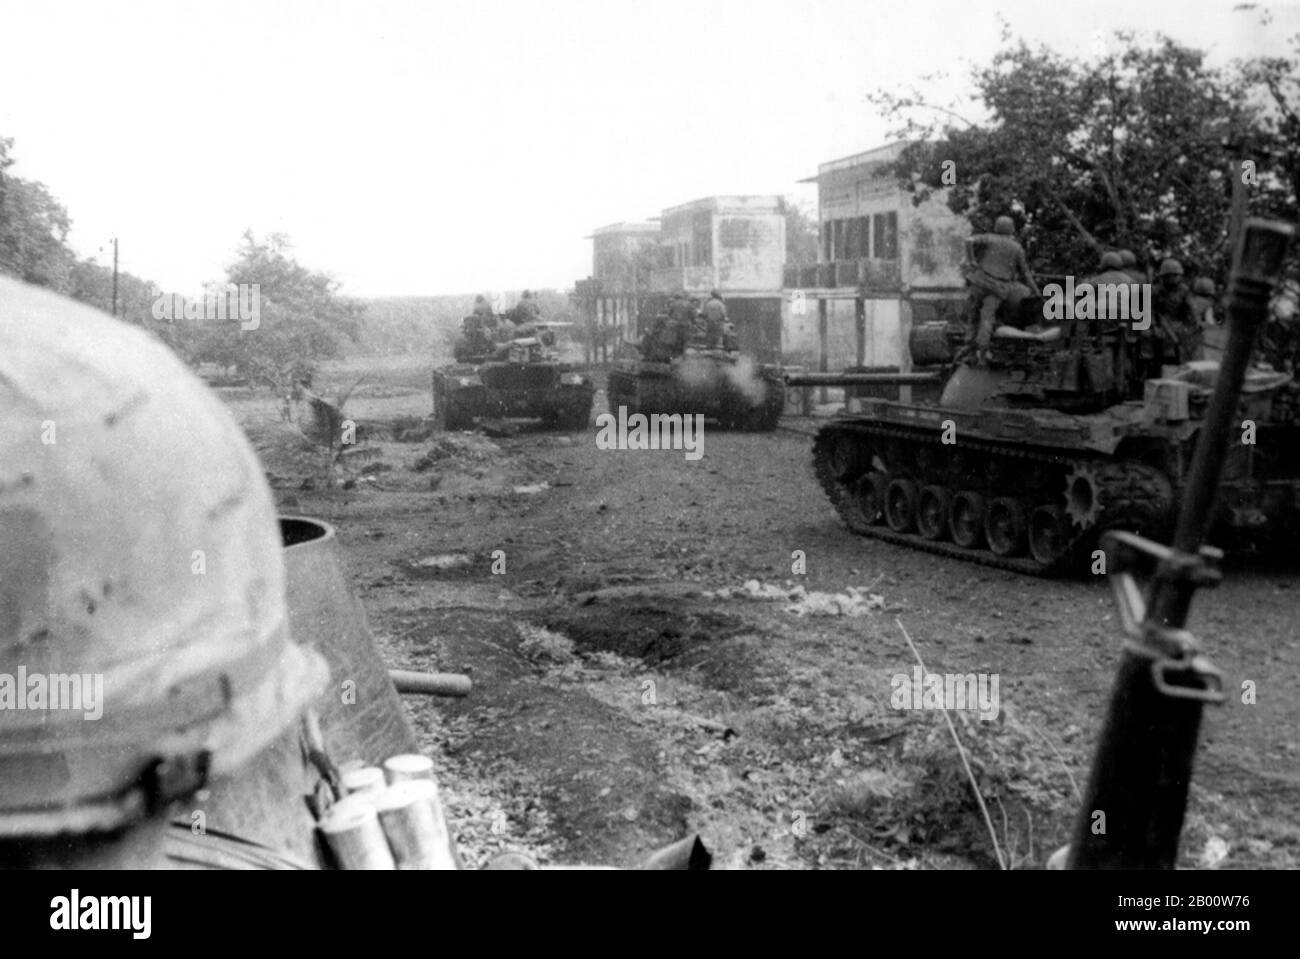 Cambodia: US troops on the ground in Cambodia - the 11th Armoured Cavalry enters Snuol. 1970.  The Cambodian Campaign (also known as the Cambodian Incursion) was a series of military operations conducted in eastern Cambodia during mid-1970 by the United States (U.S.) and the Republic of Vietnam (South Vietnam) during the Vietnam War. A total of 13 major operations were conducted by the Army of the Republic of Vietnam (ARVN) between 29 April and 22 July and by U.S. forces between 1 May and 30 June. Stock Photo